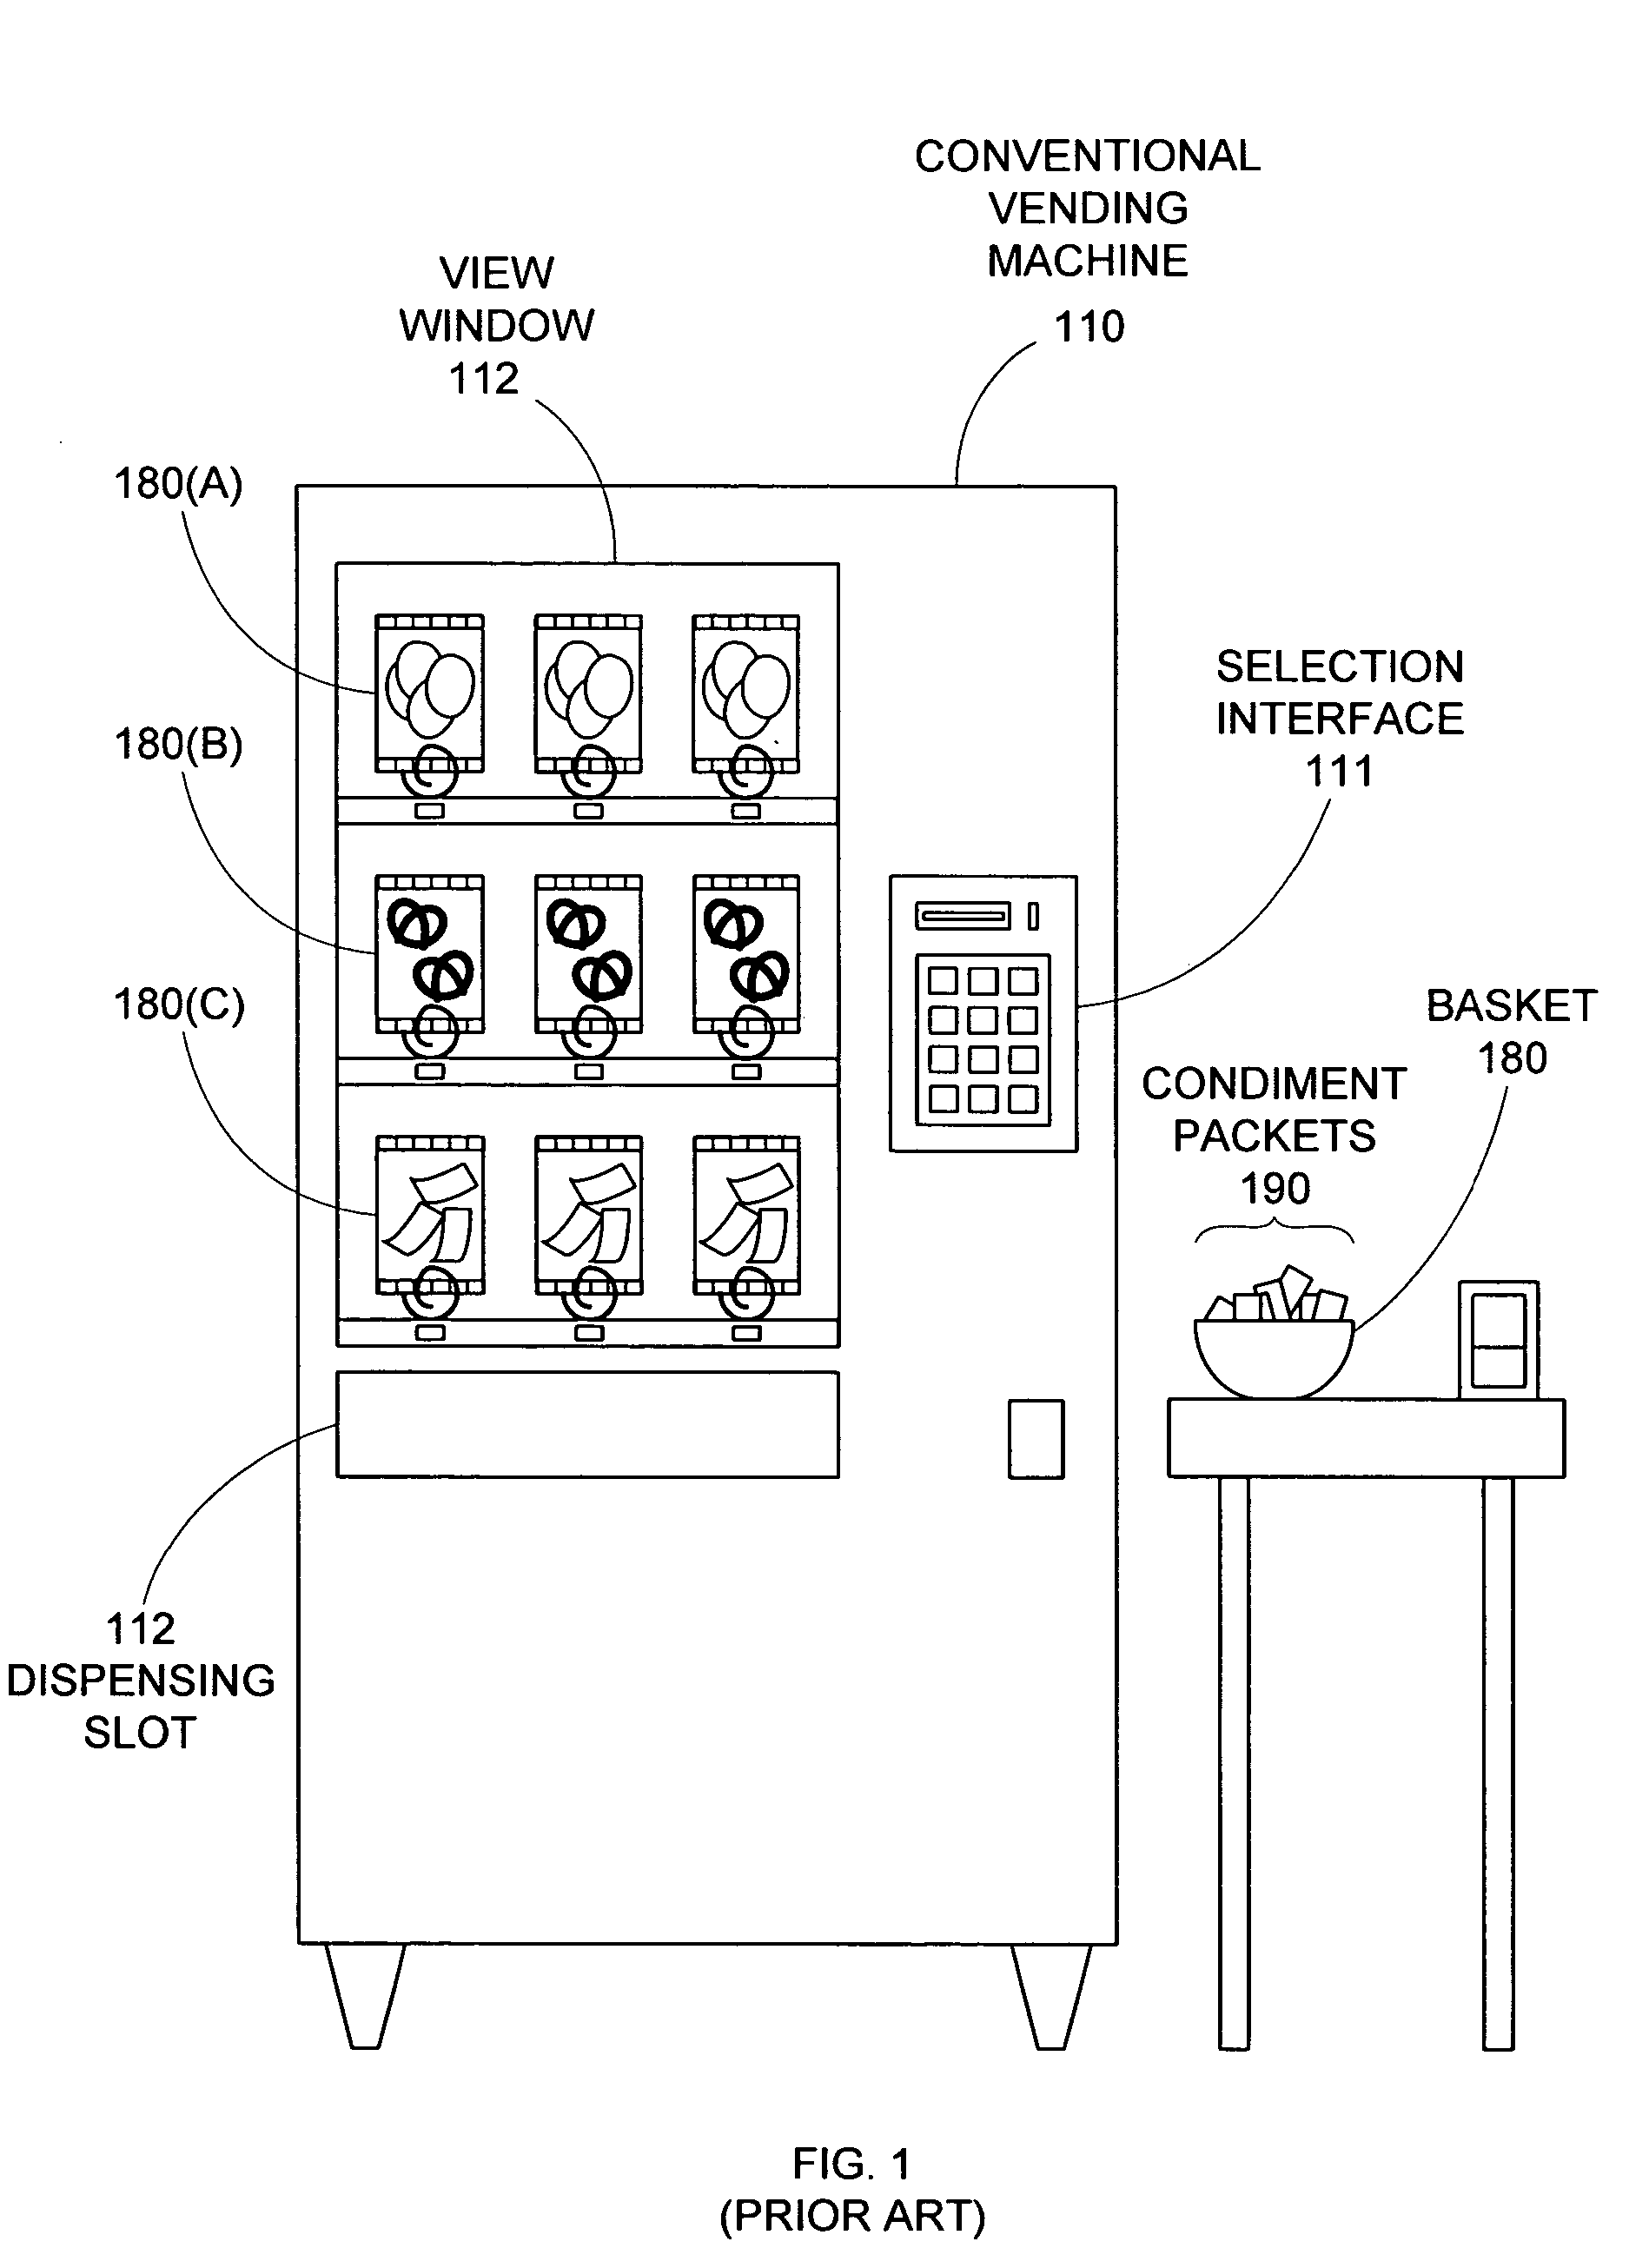 Automated condiment dispensing system